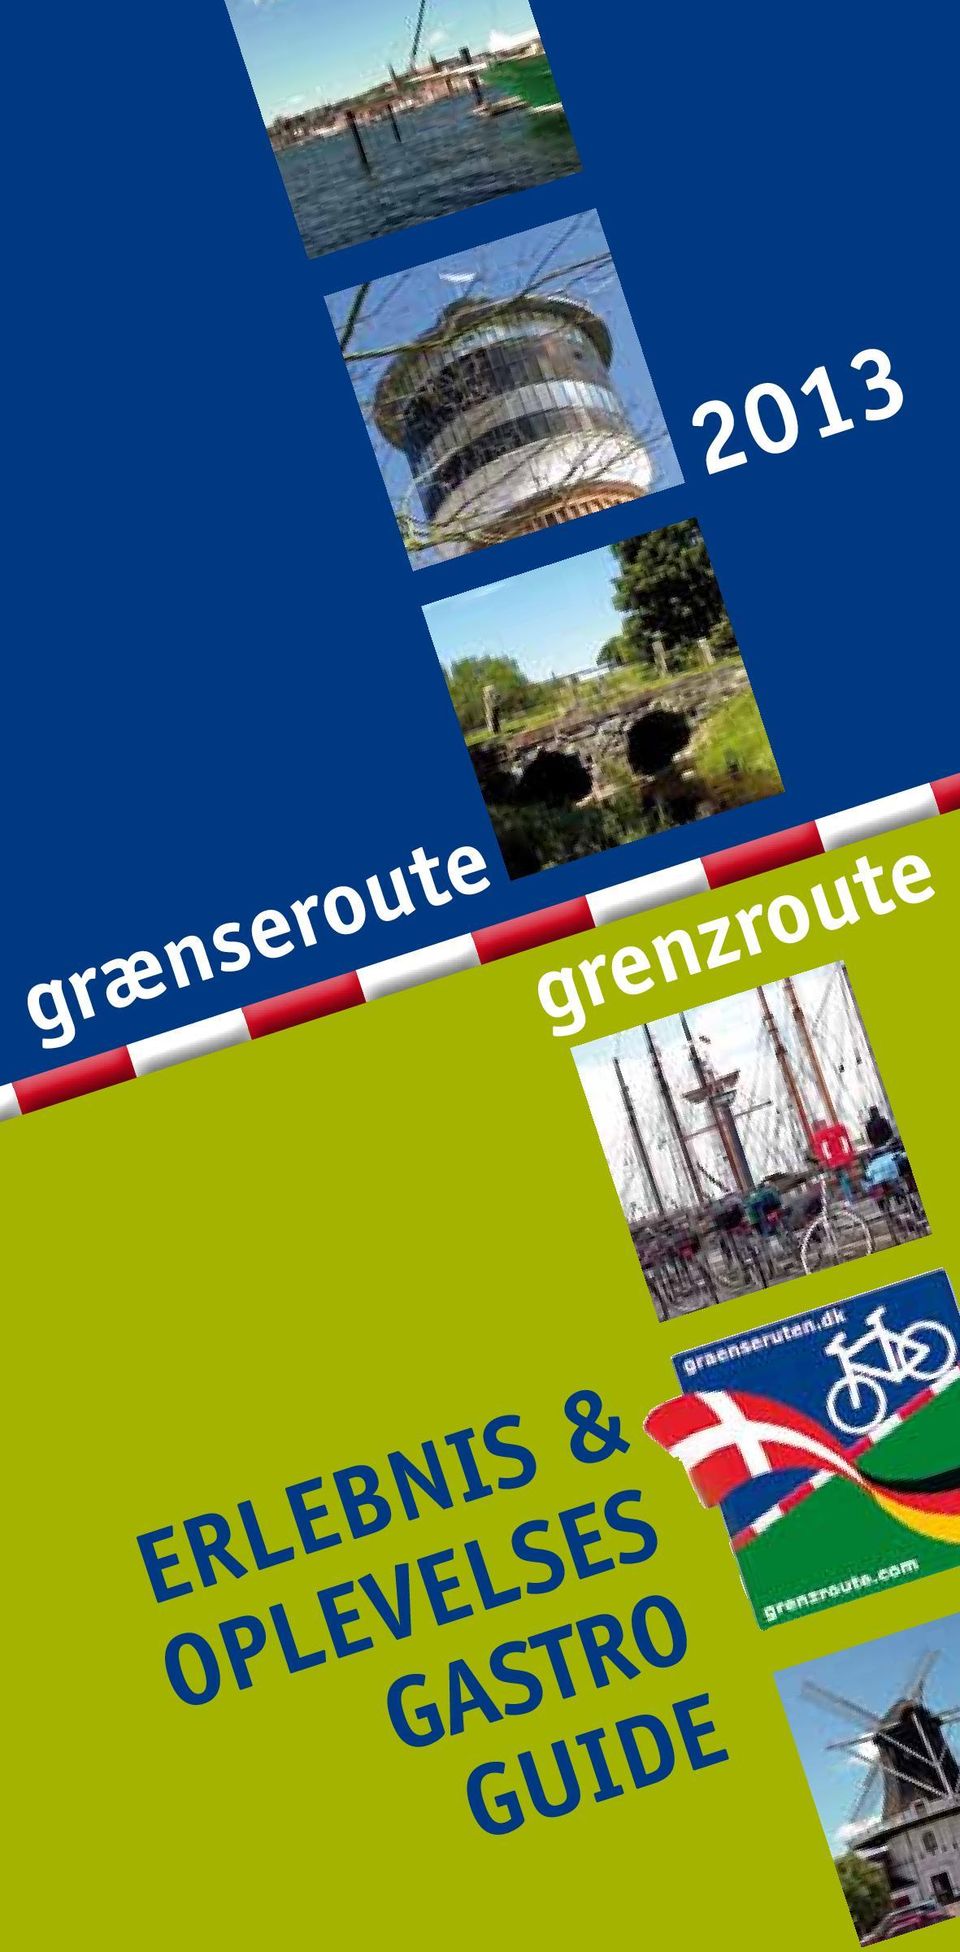 grenzroute